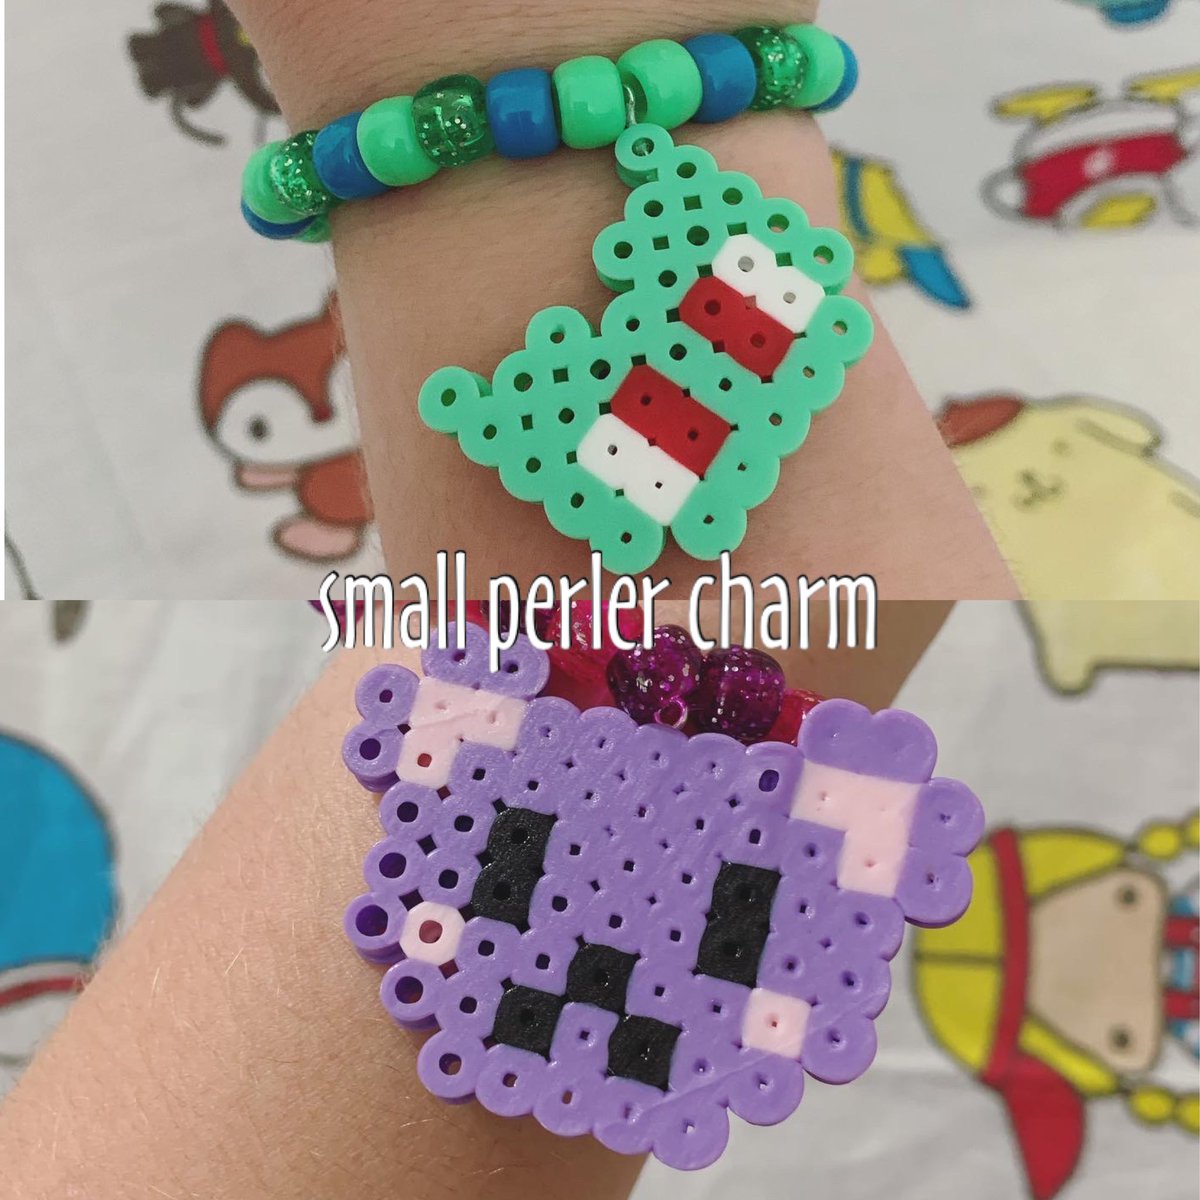 and finally, i do custom kandi outside of patreon as well! dm me for more info on that! thank you all for reading, retweeting this thread would be highly appreciated!